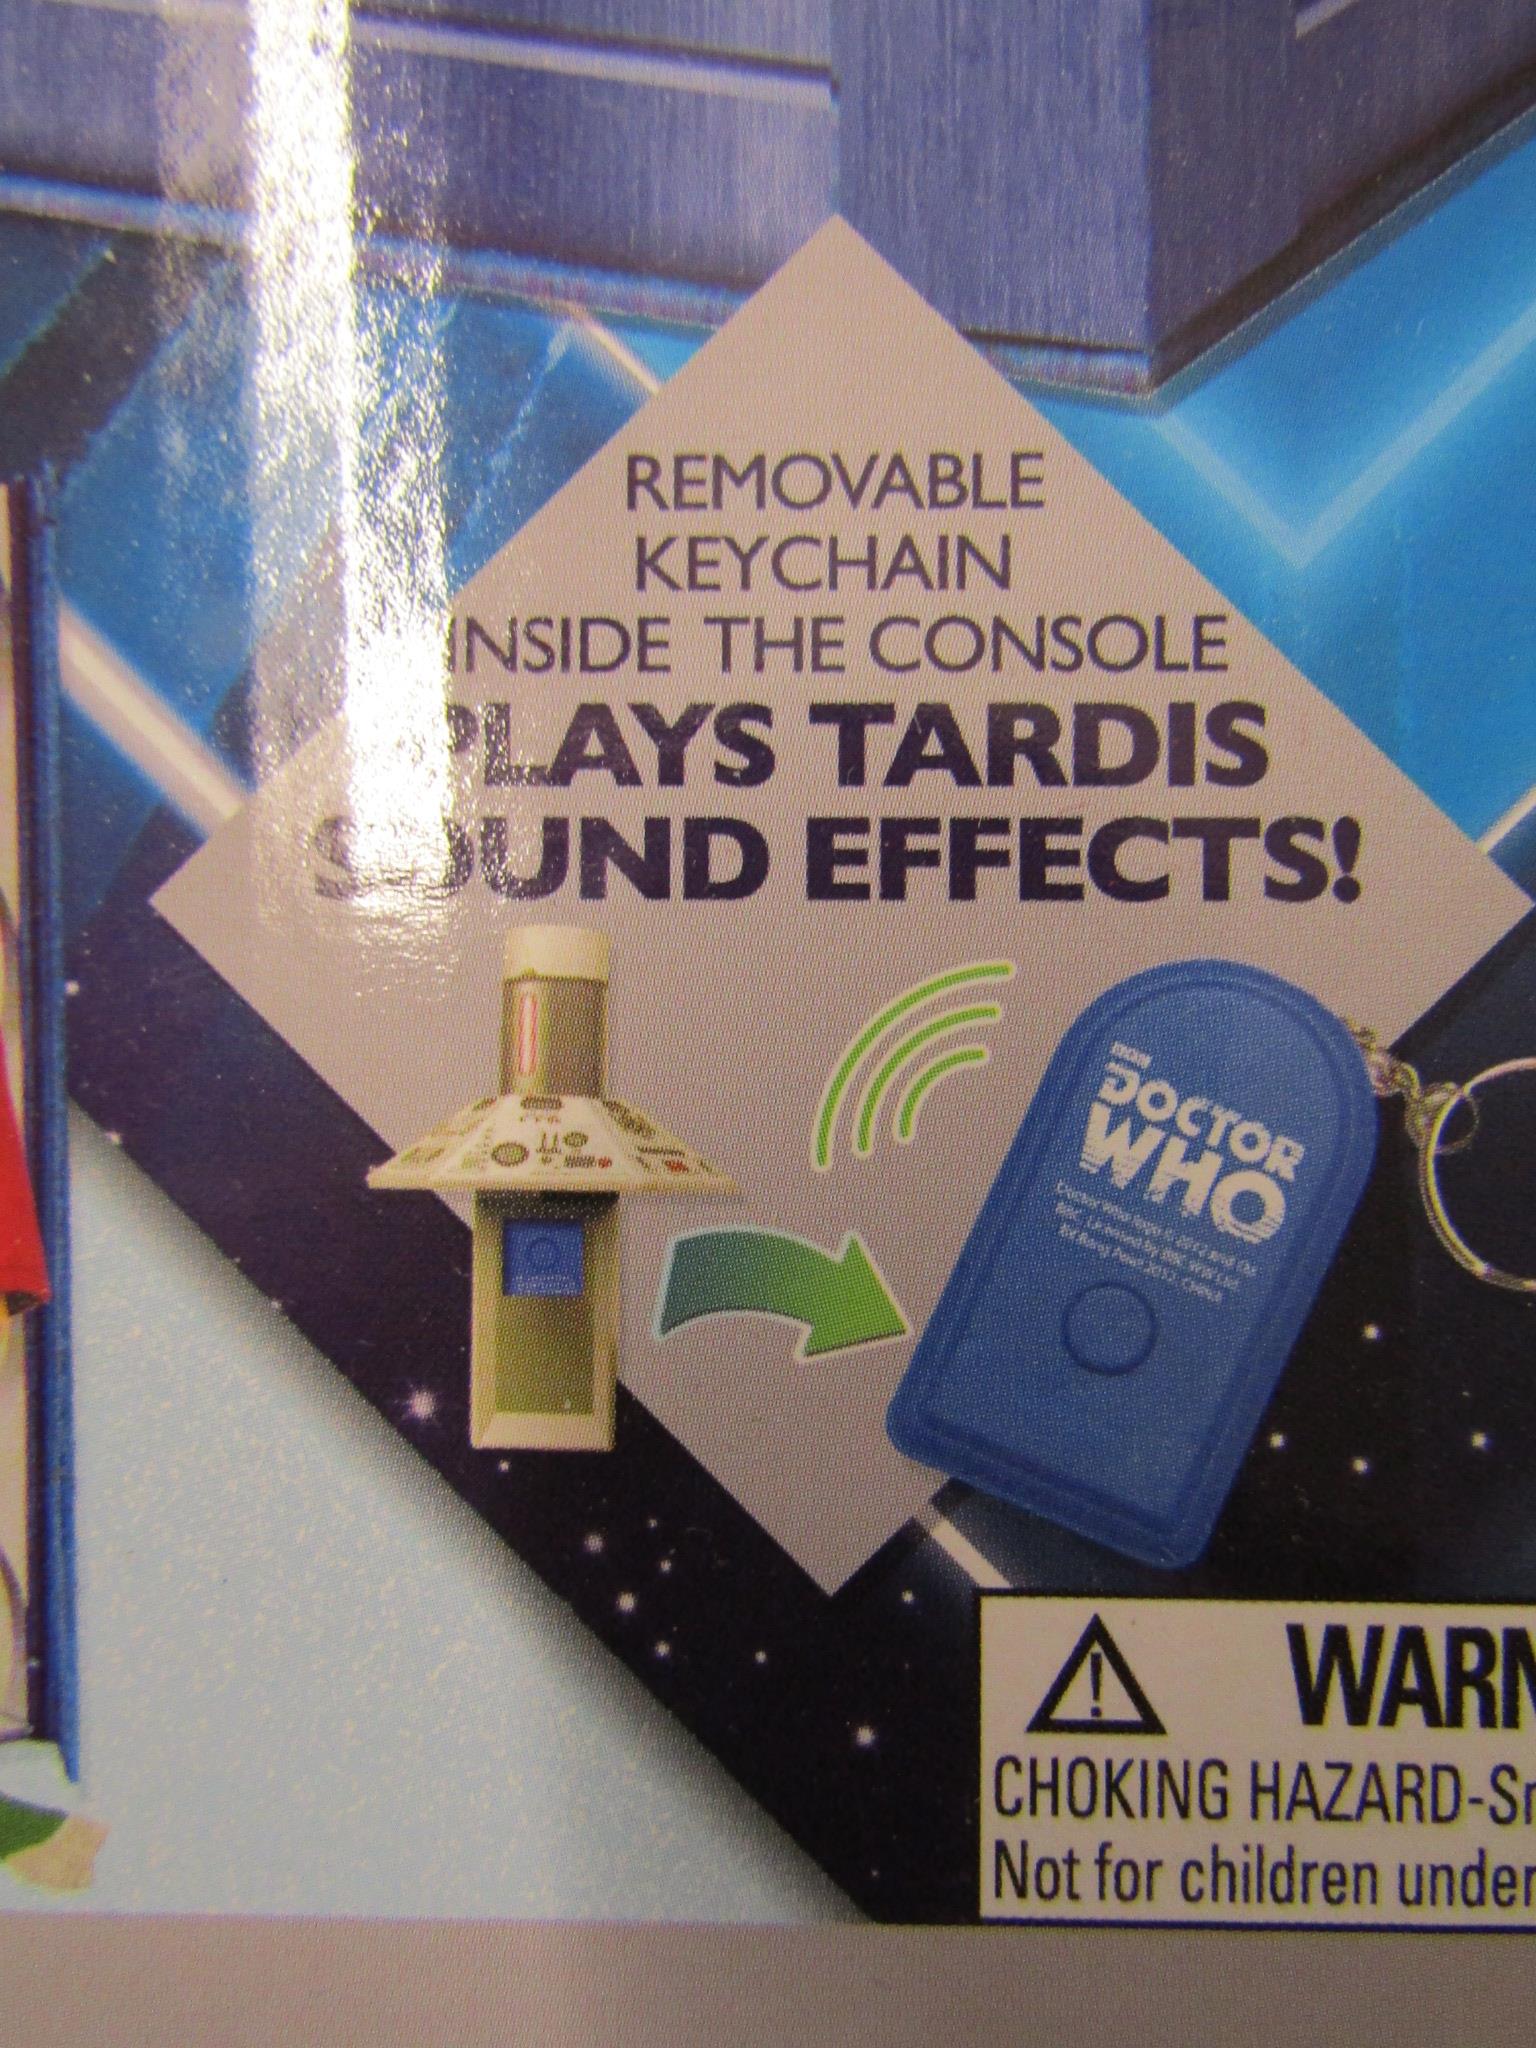 Collection of Dr Who, limited edition wooden model of the Tardis, Classic Moments An Unearthly - Image 8 of 8